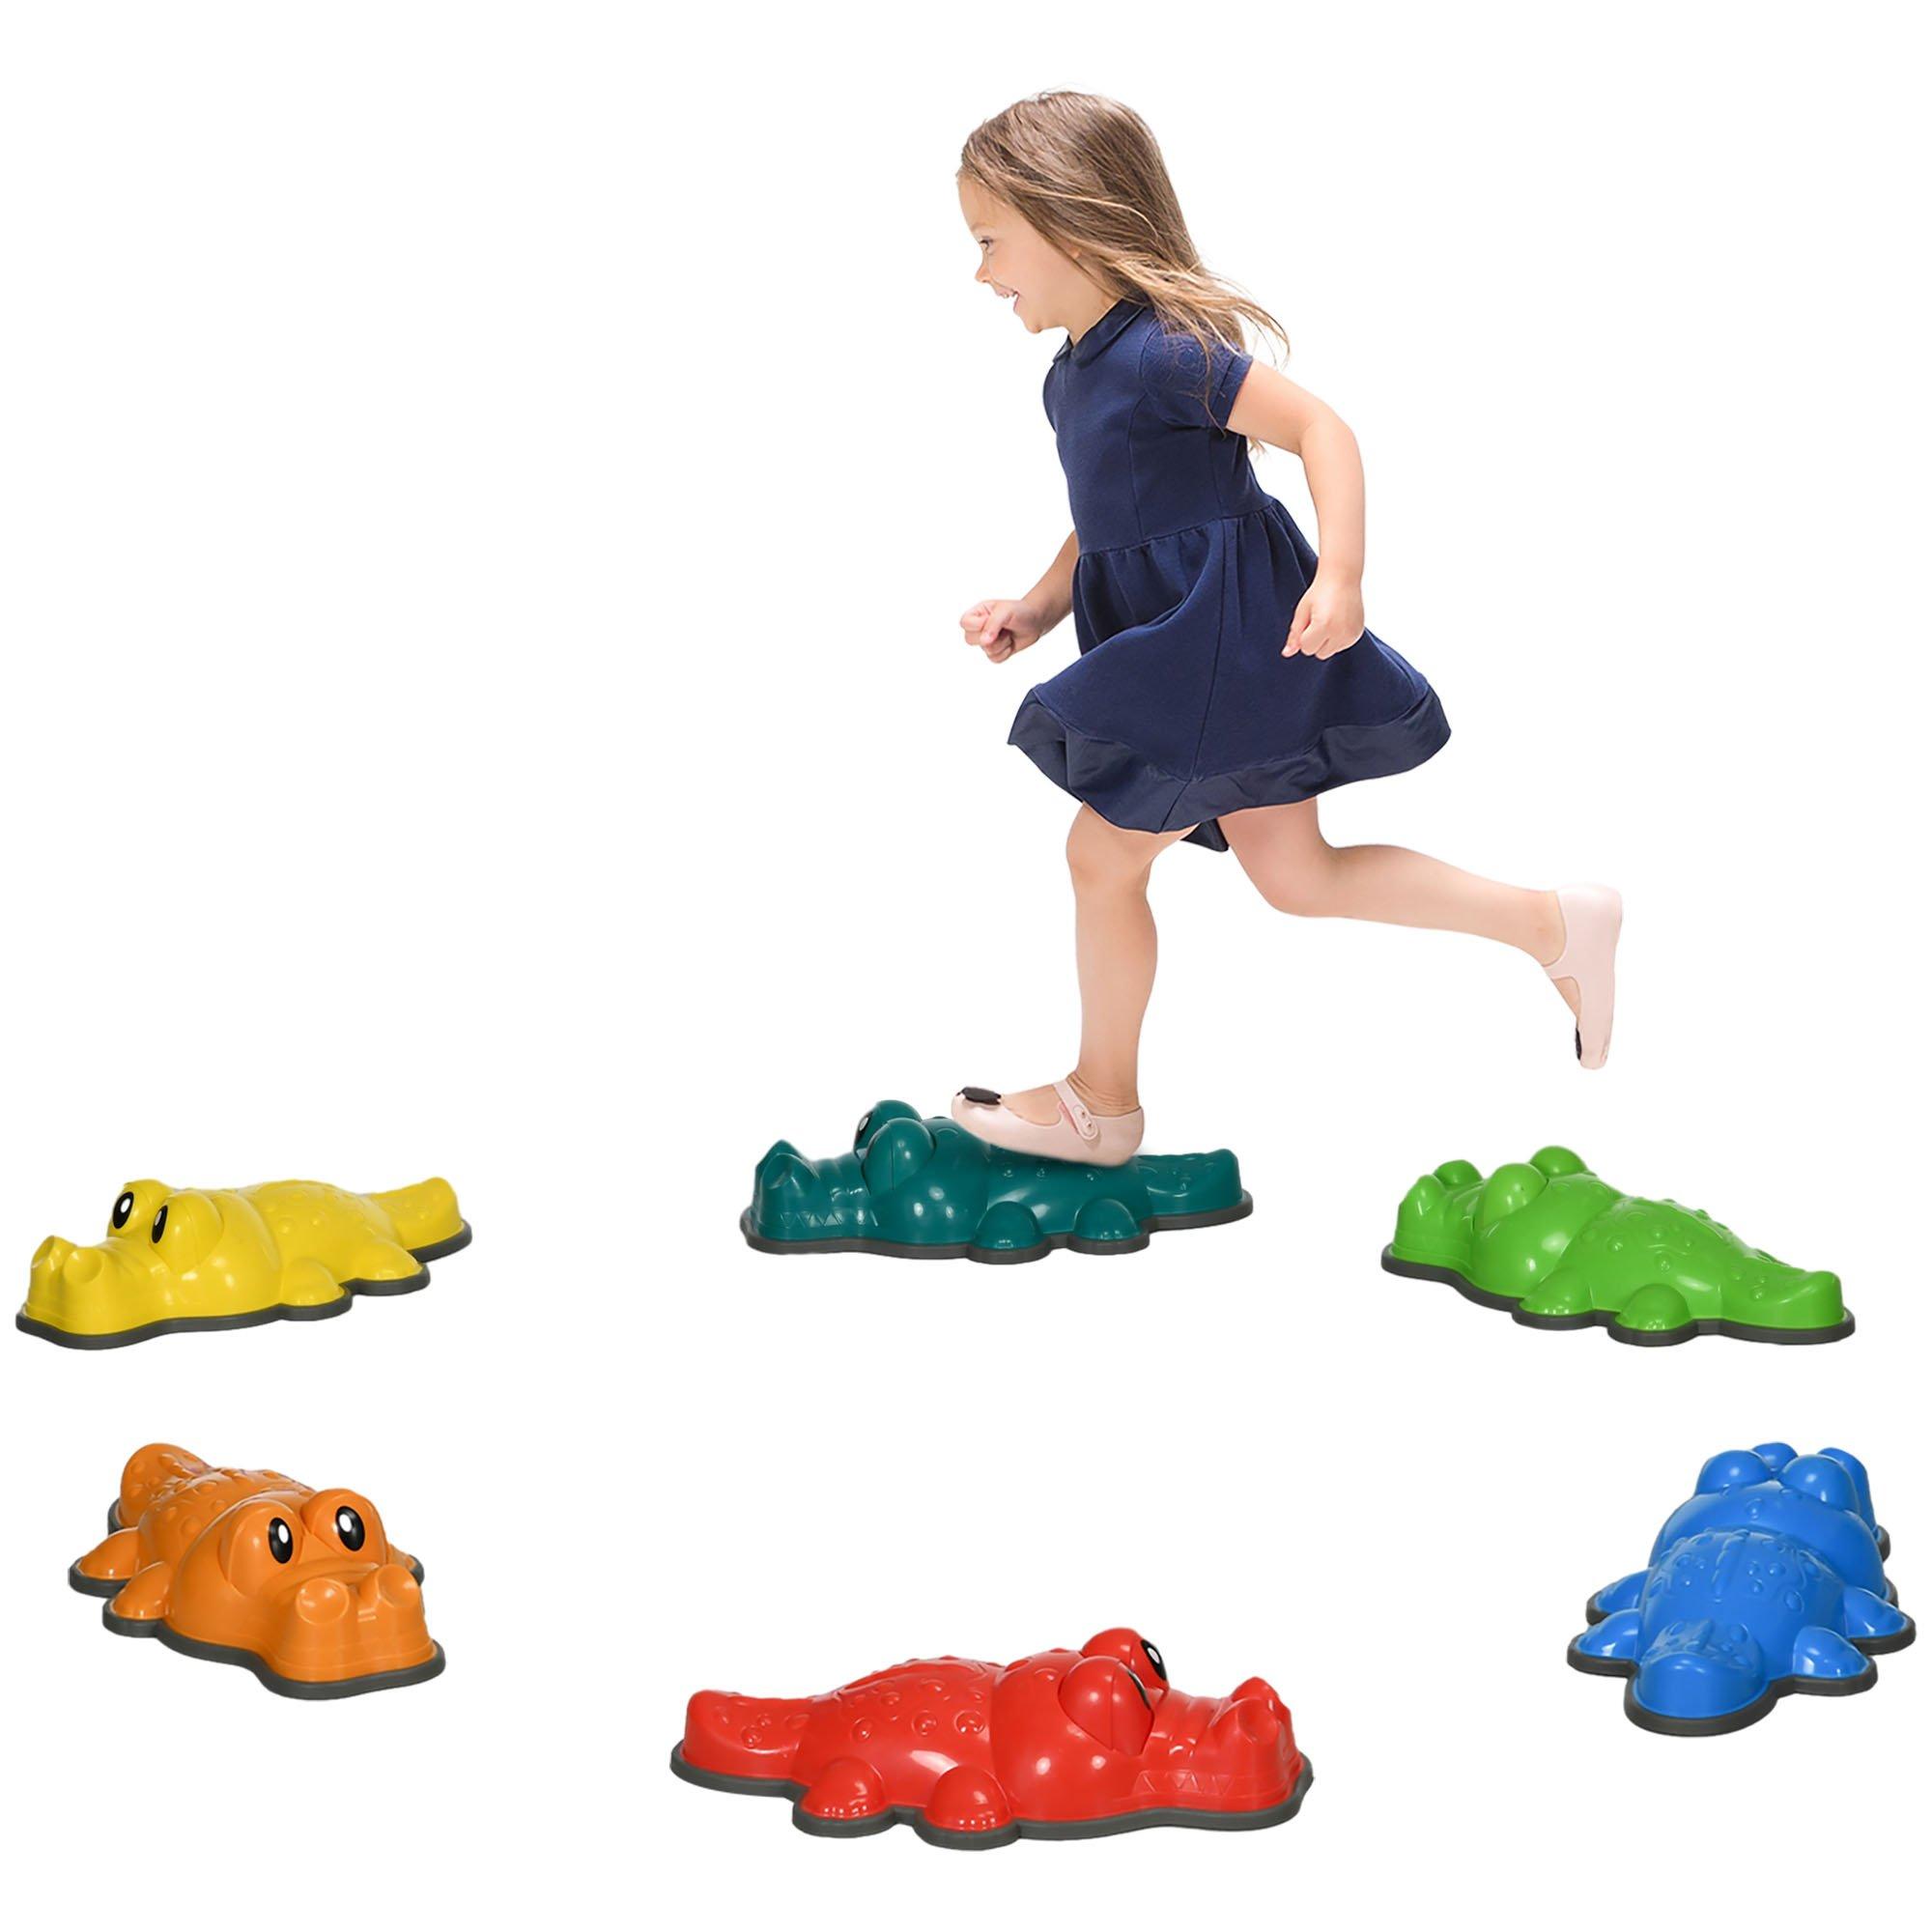 6PCs Kids Kids Stepping Stones with Anti-Slip Edge, Indoor and Outdoor